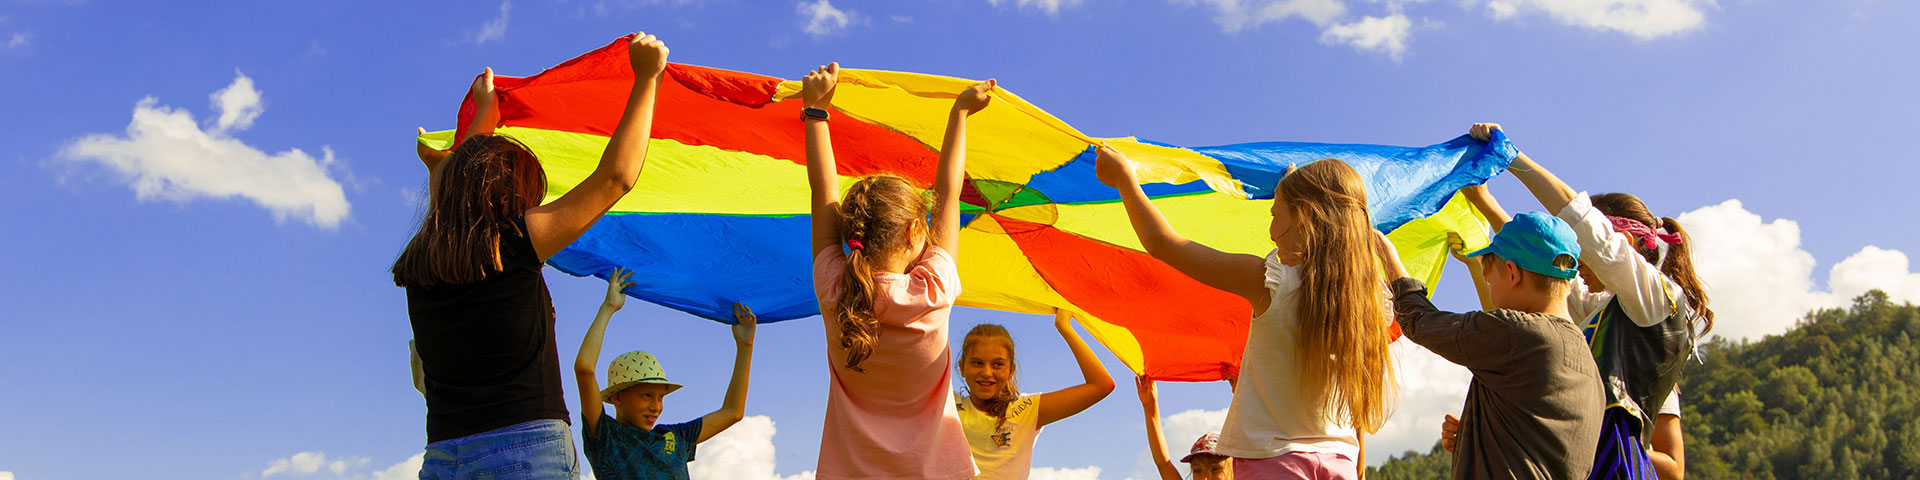 group of kids with a colorful parachute Photo by Artem Kniaz on Unsplash